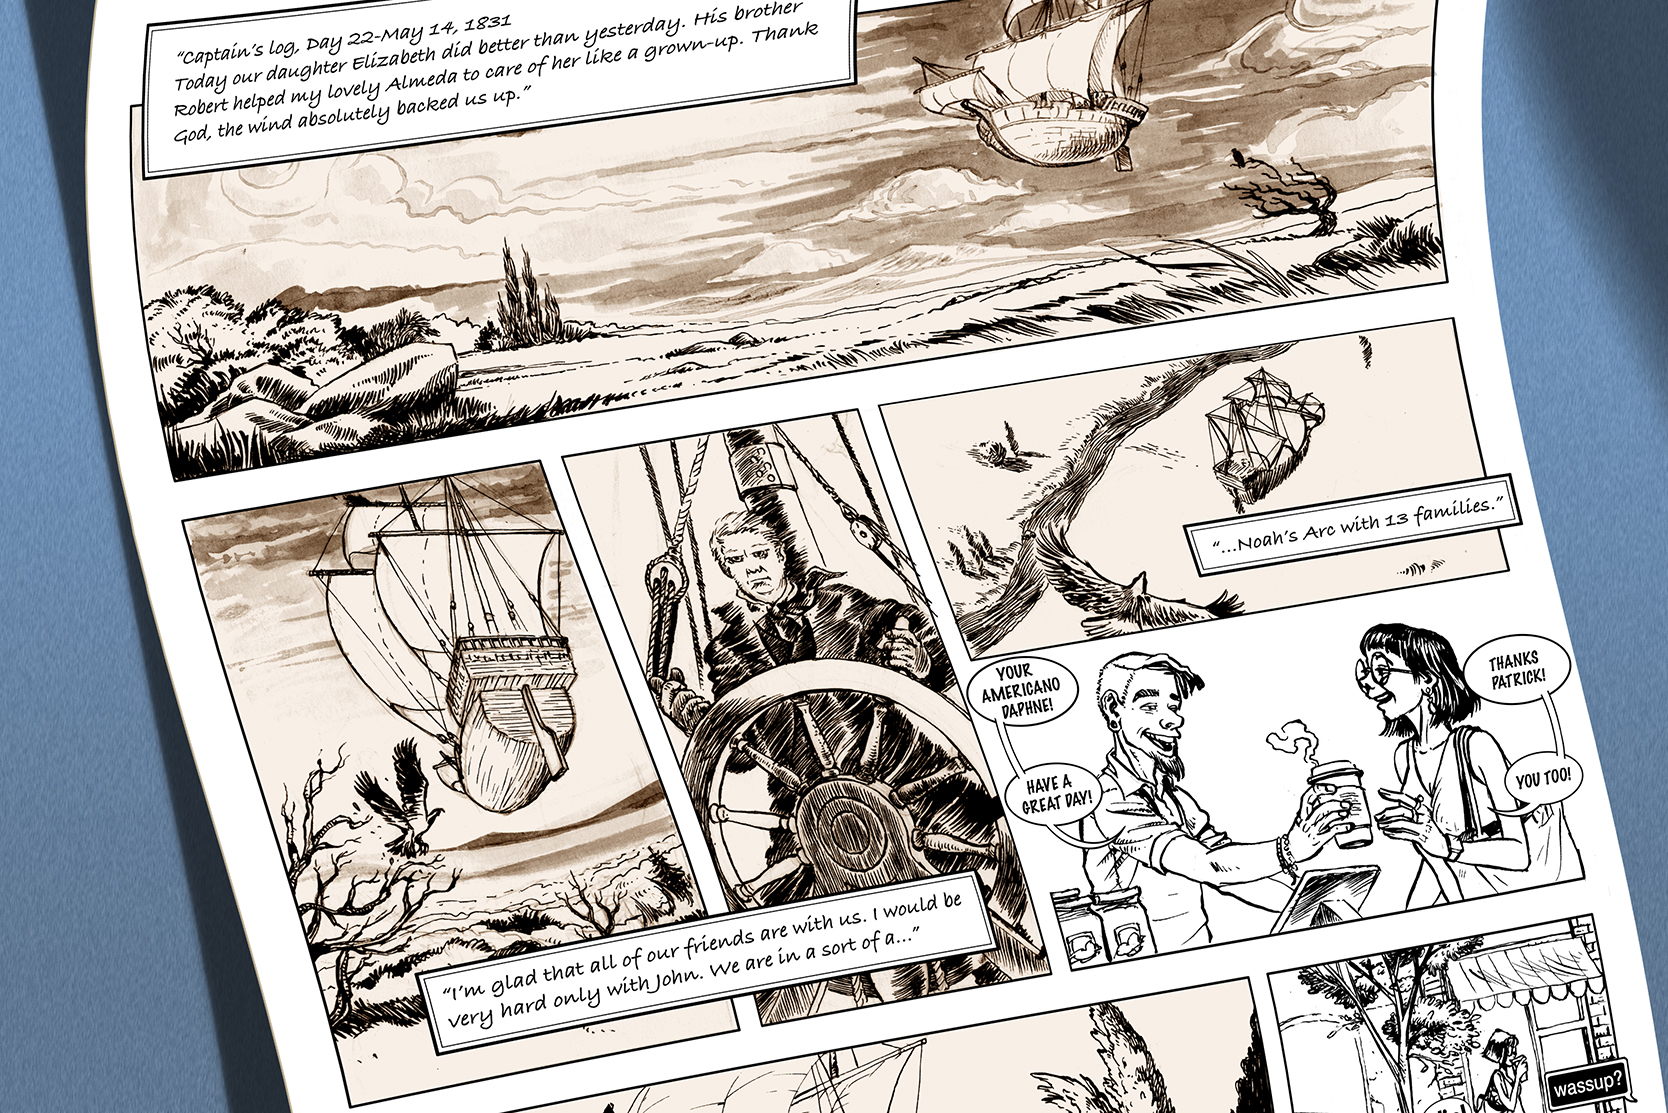 Searching Roots Through a Graphic Novel